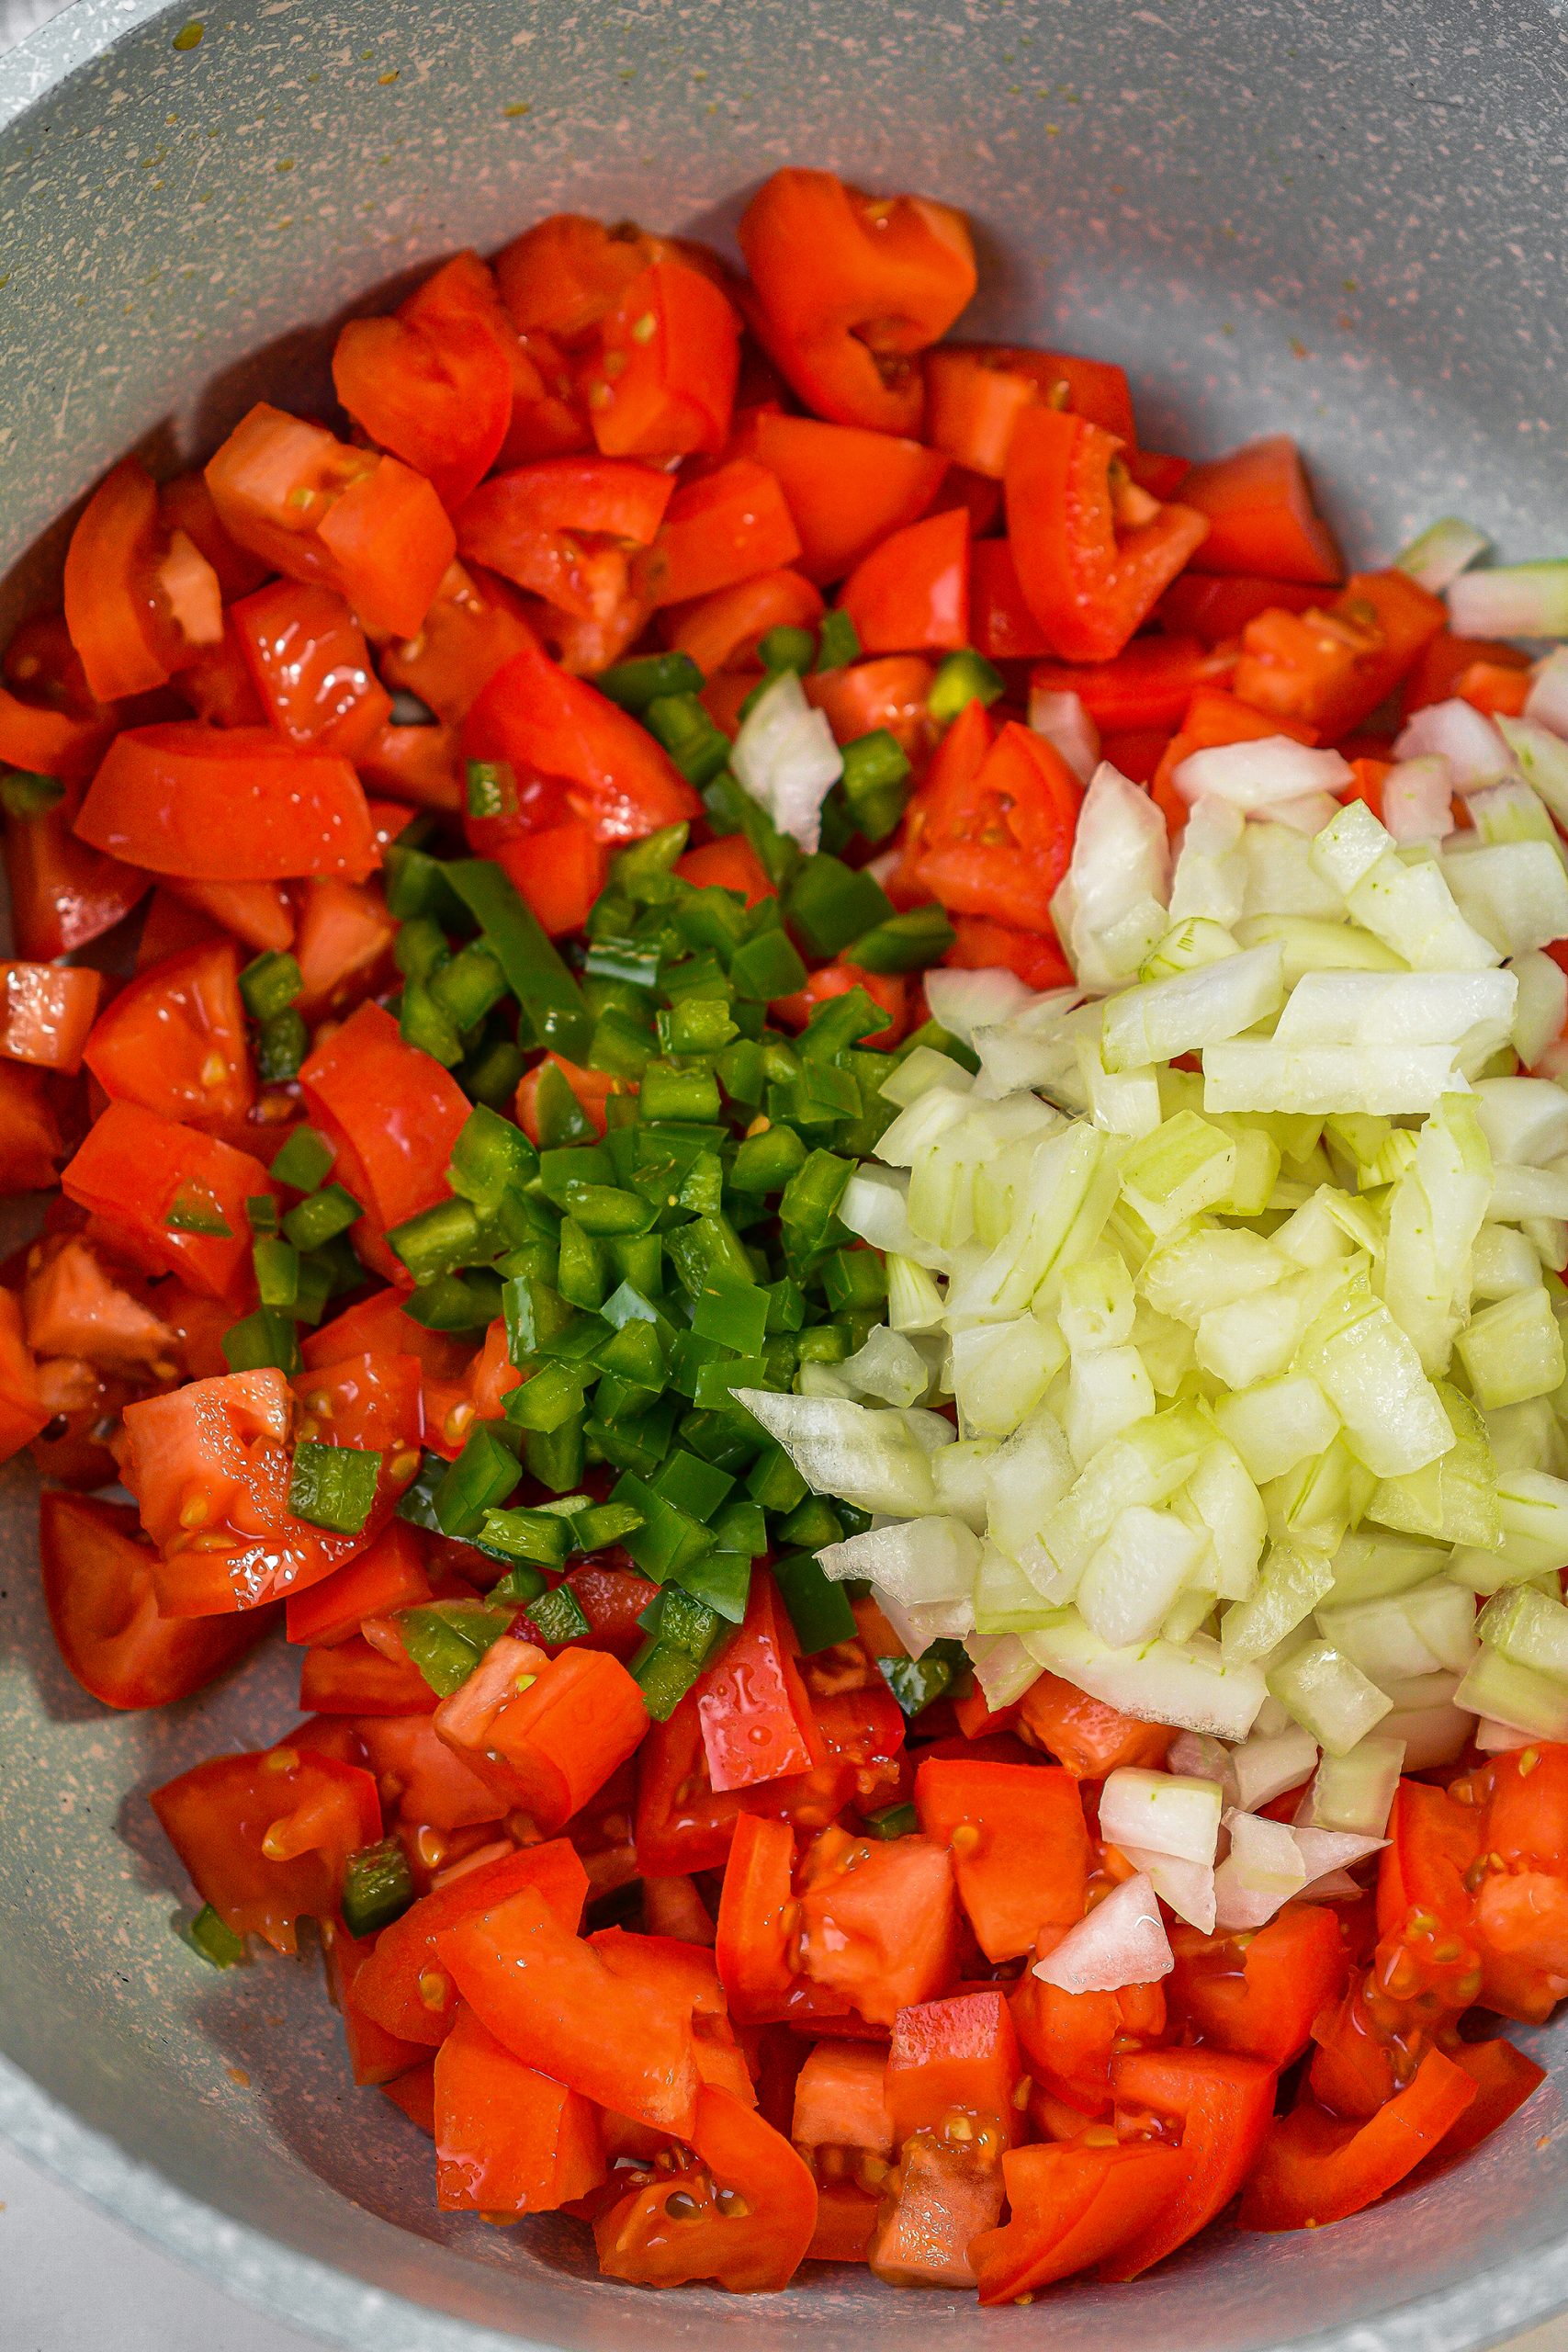 While the cracklins are soaking, add the tomatoes, onion and jalapeno to a large pot over medium heat on the stove.